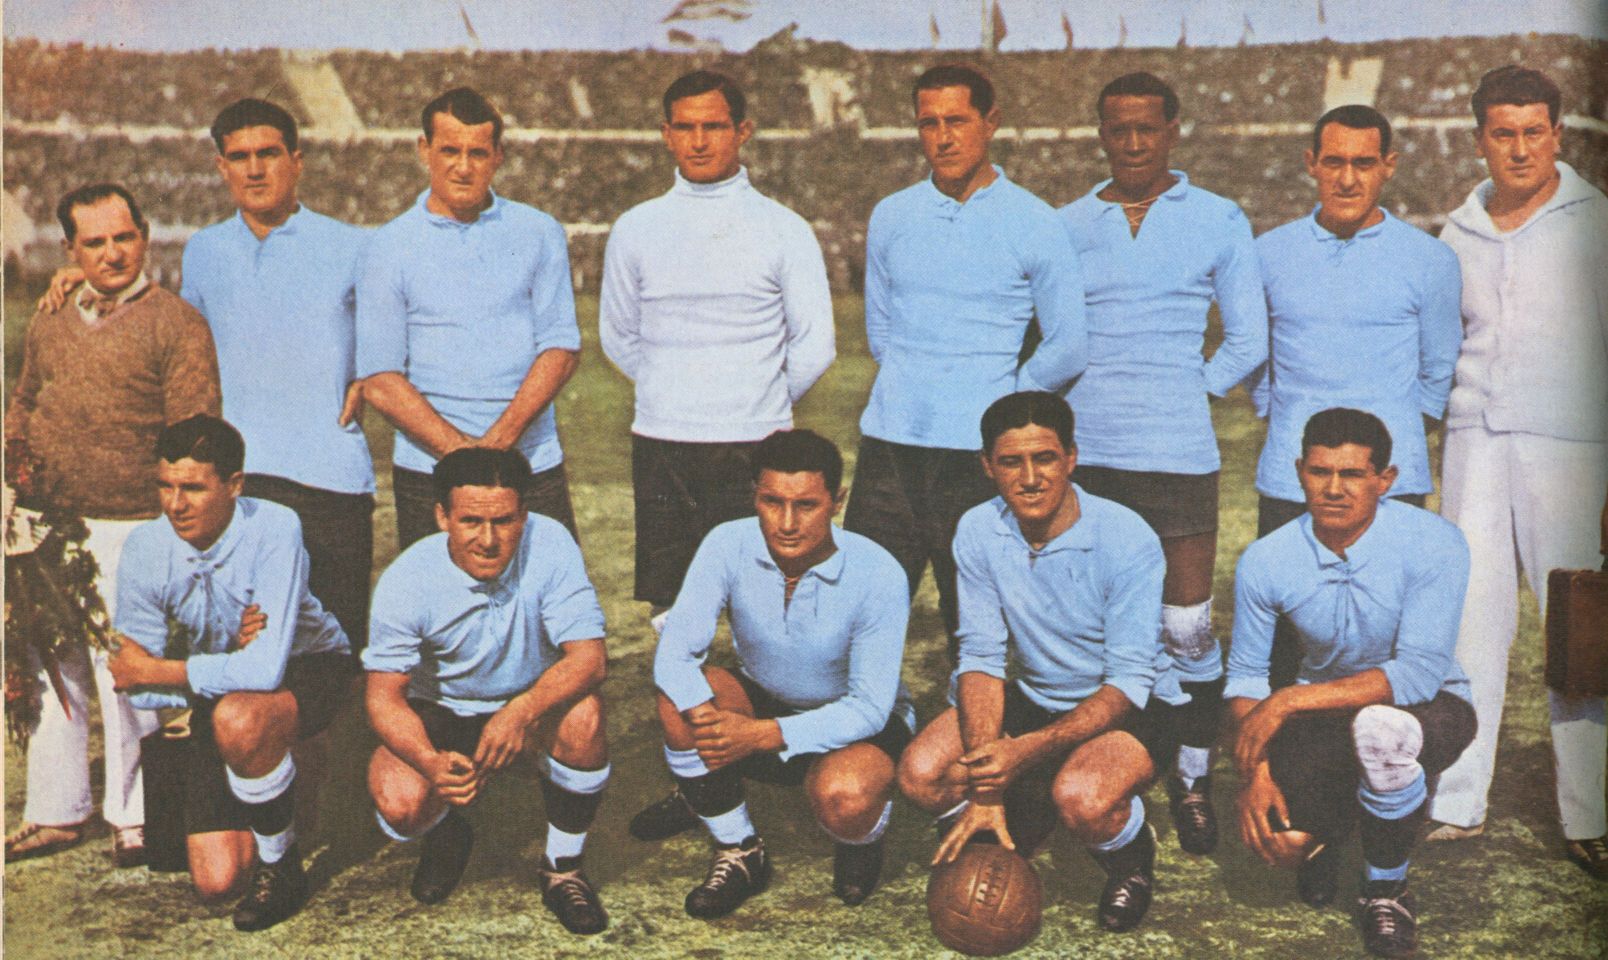 world-champion-1930-uruguay-with-the-famous-t-model-ball-1366282901.jpg